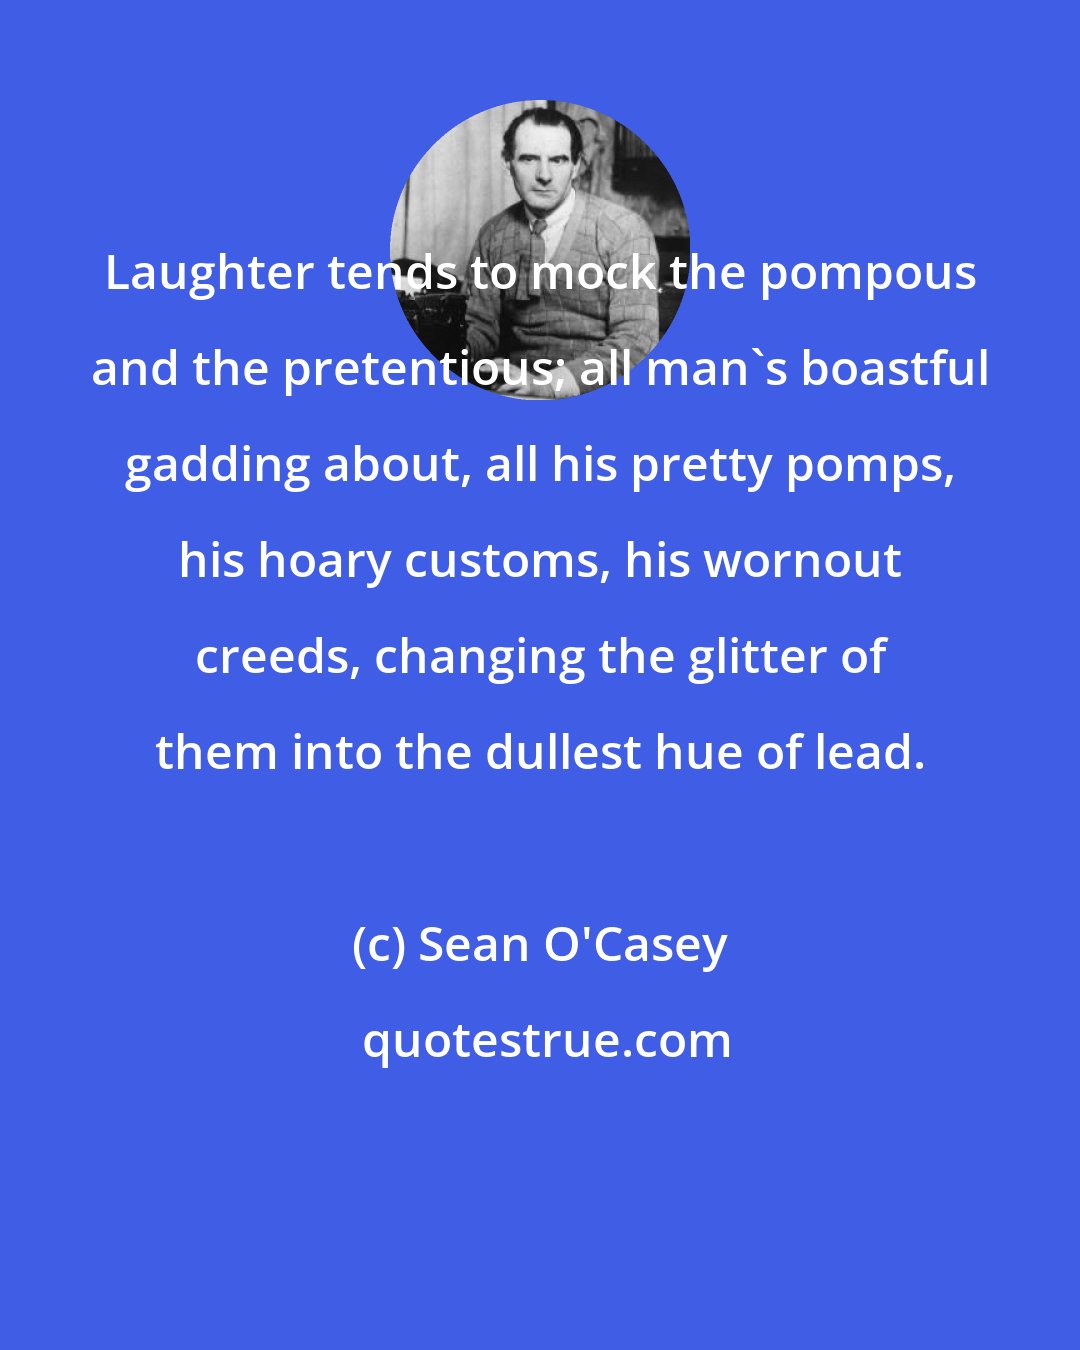 Sean O'Casey: Laughter tends to mock the pompous and the pretentious; all man's boastful gadding about, all his pretty pomps, his hoary customs, his wornout creeds, changing the glitter of them into the dullest hue of lead.